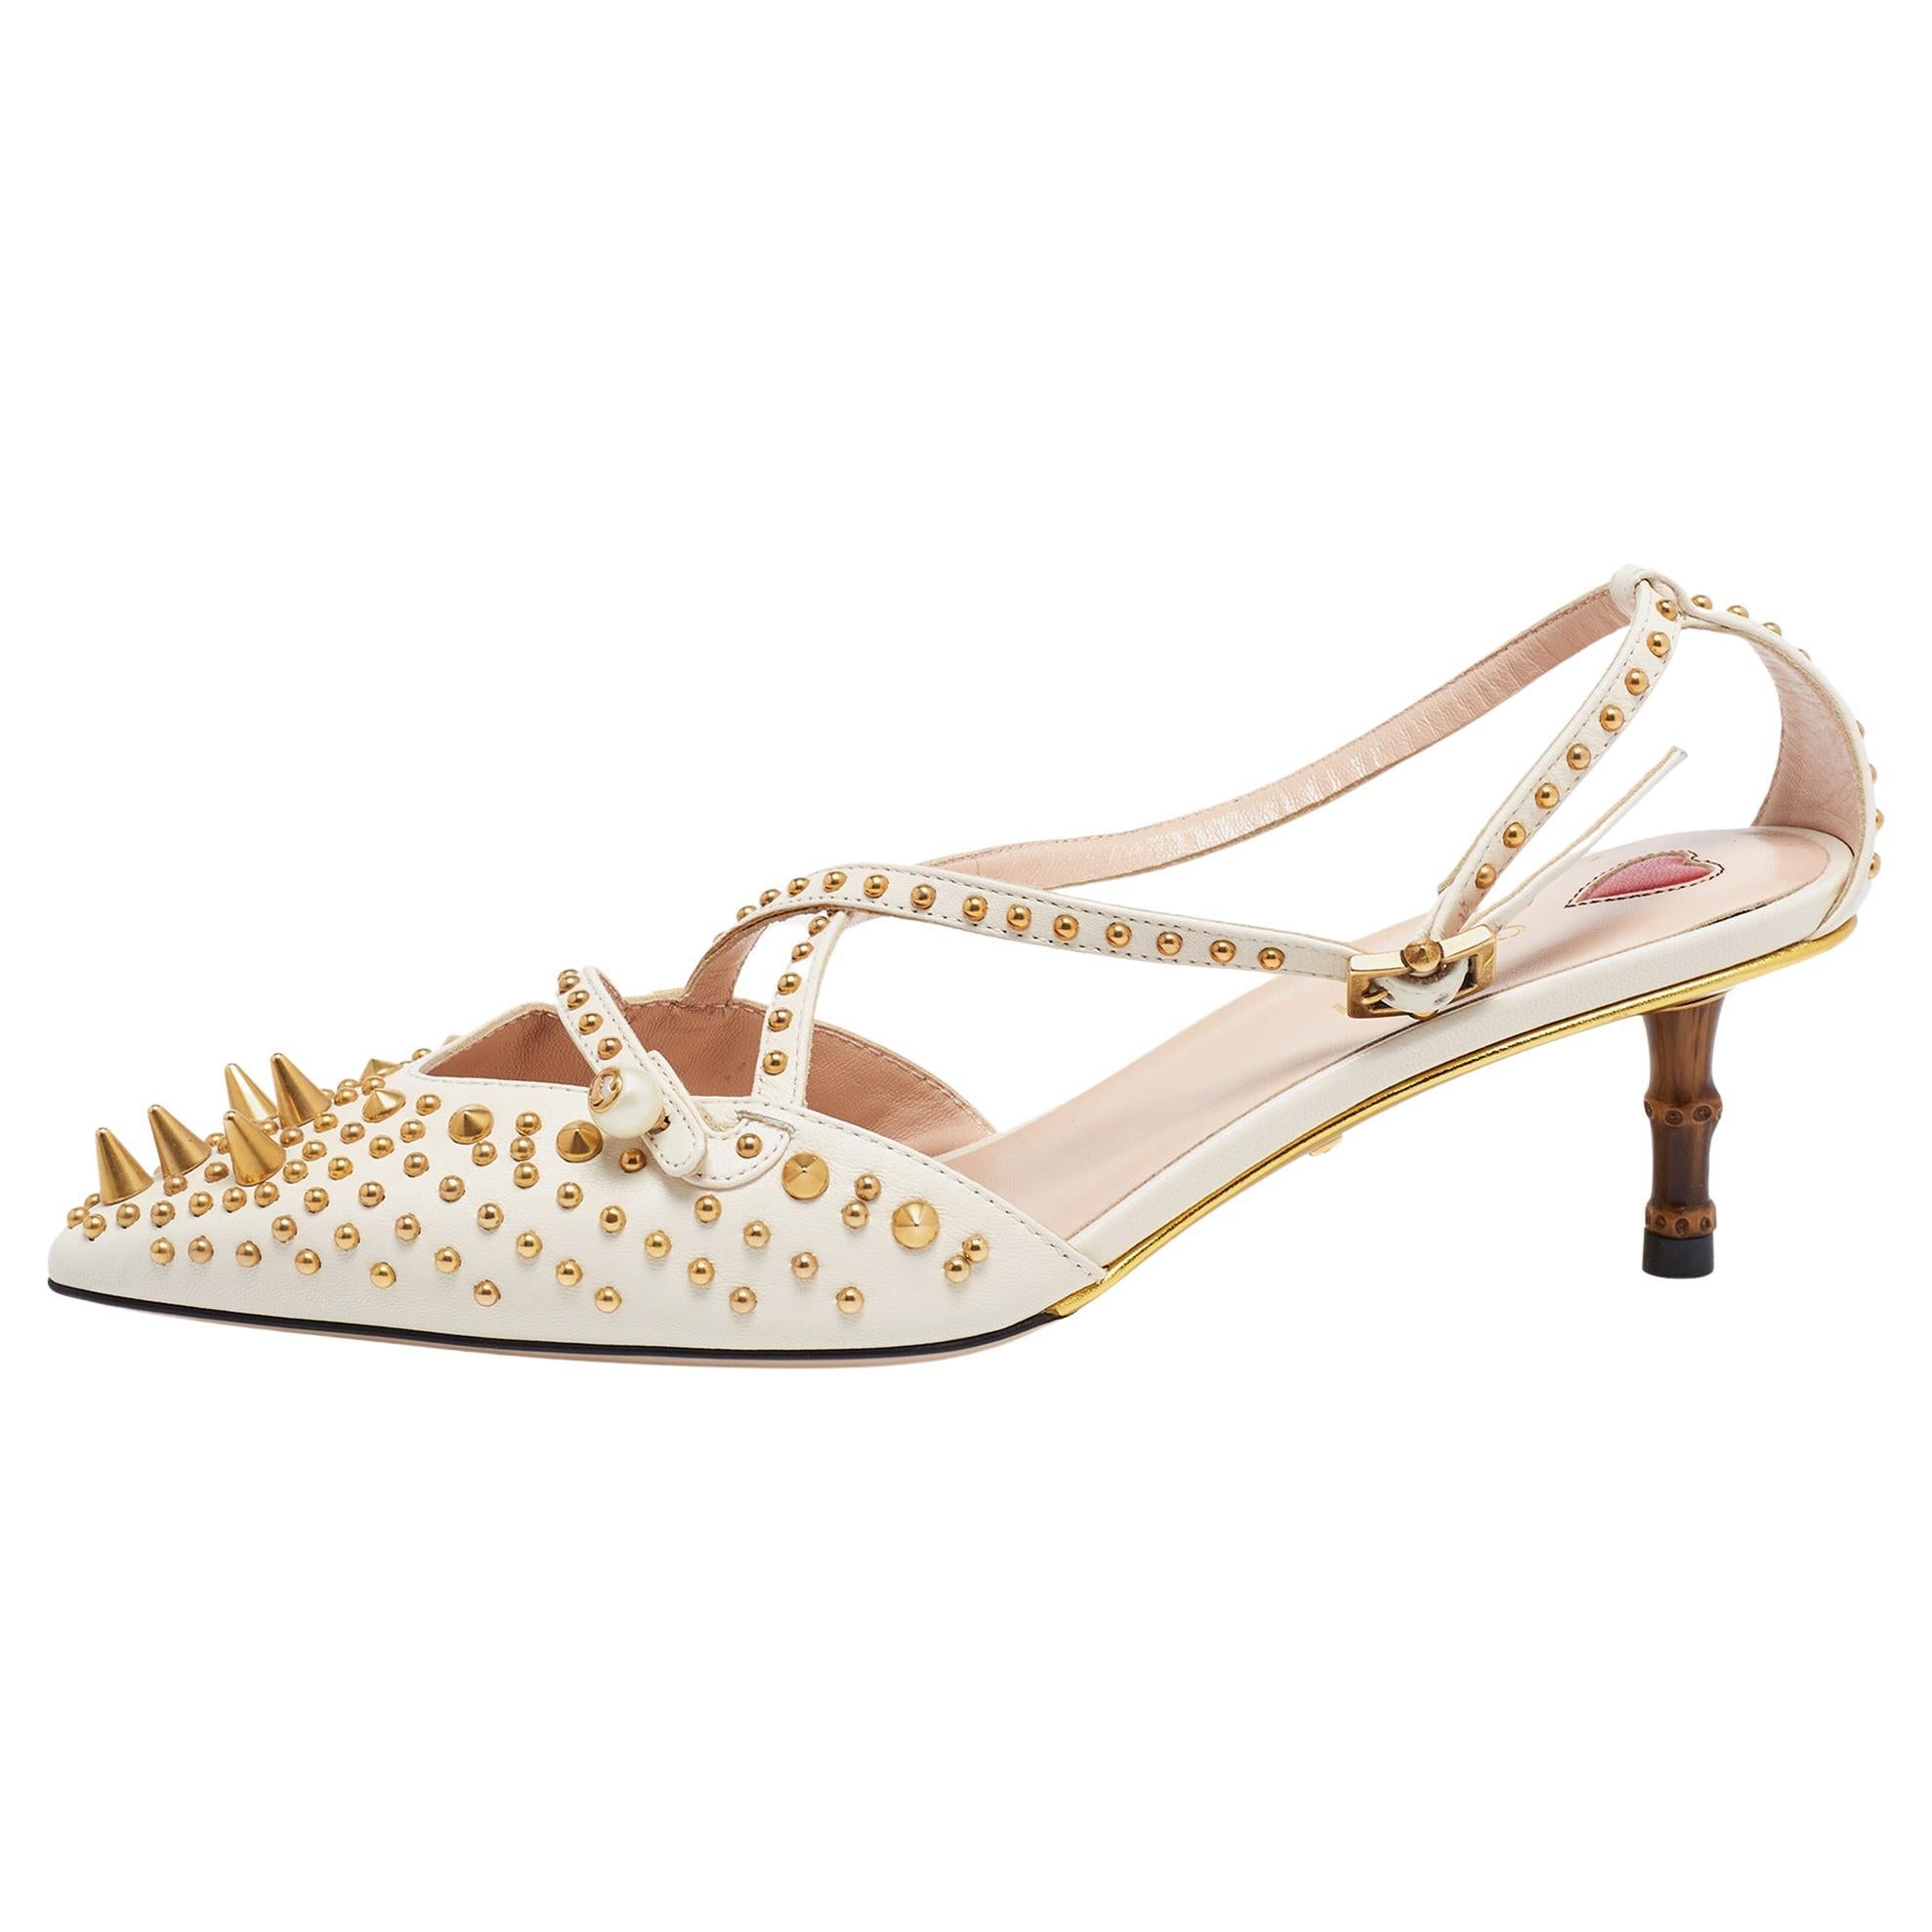 Gucci Cream Leather Unia Spike and Studded Bamboo Heel Pumps Size 37